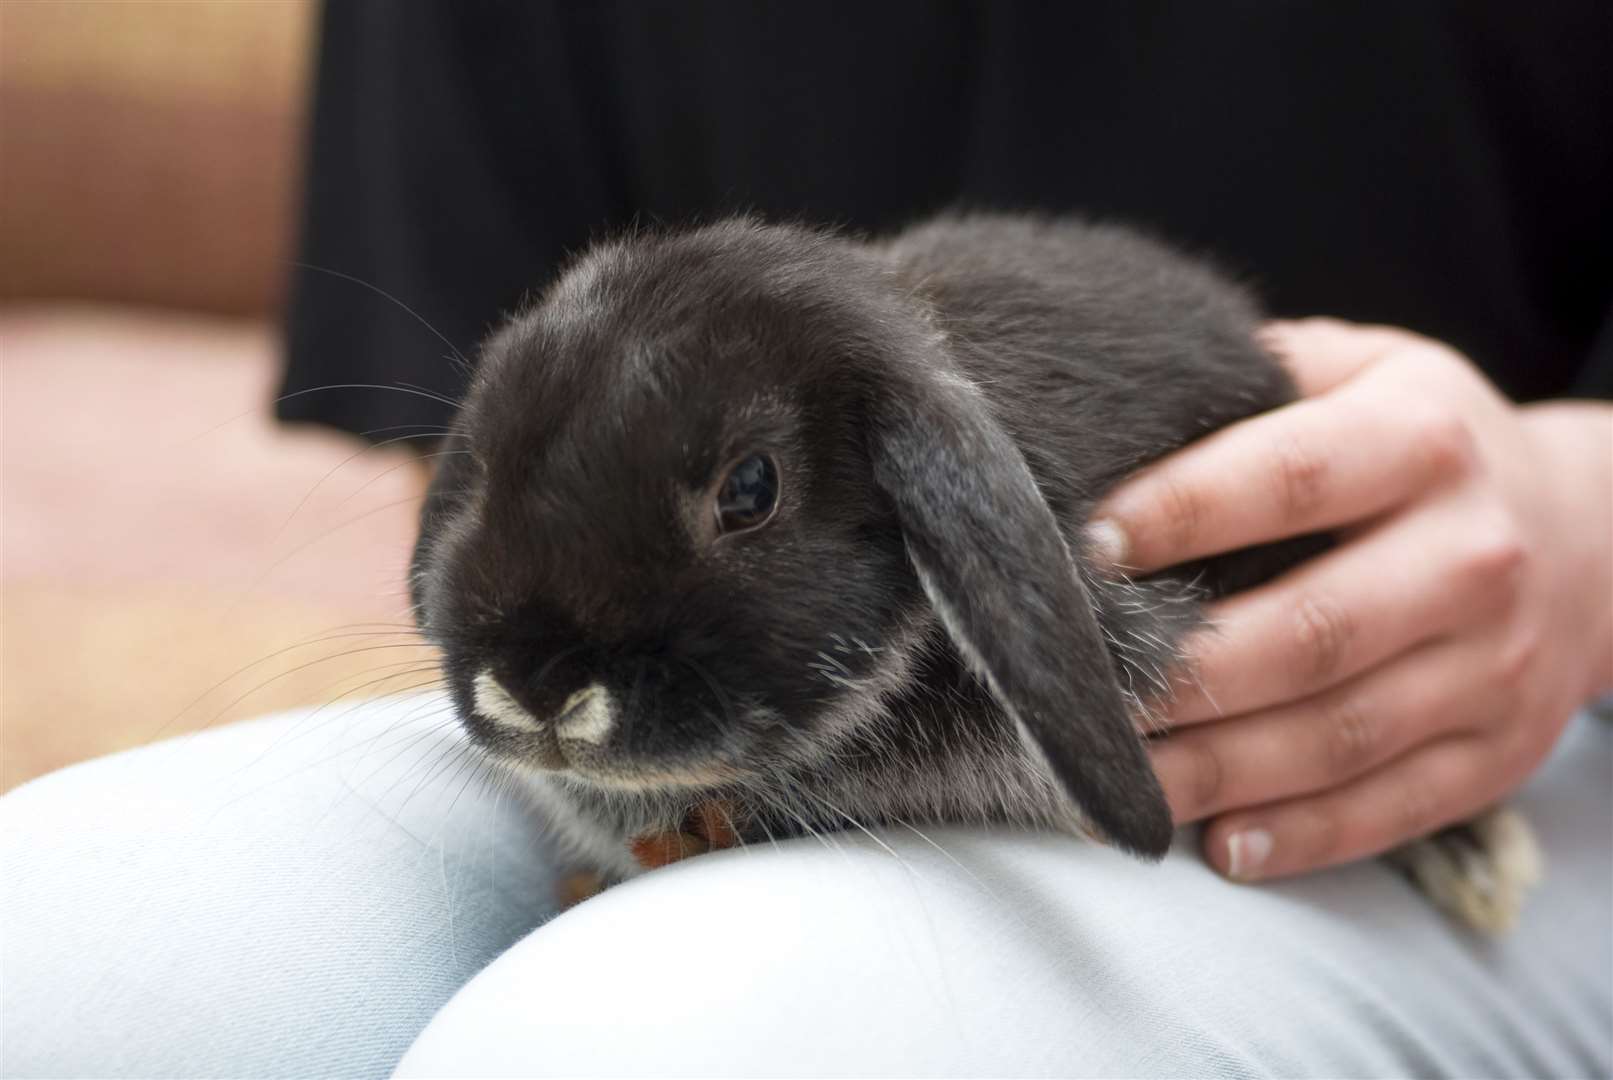 Rabbits can happily live indoors or outdoors if you care for them properly.